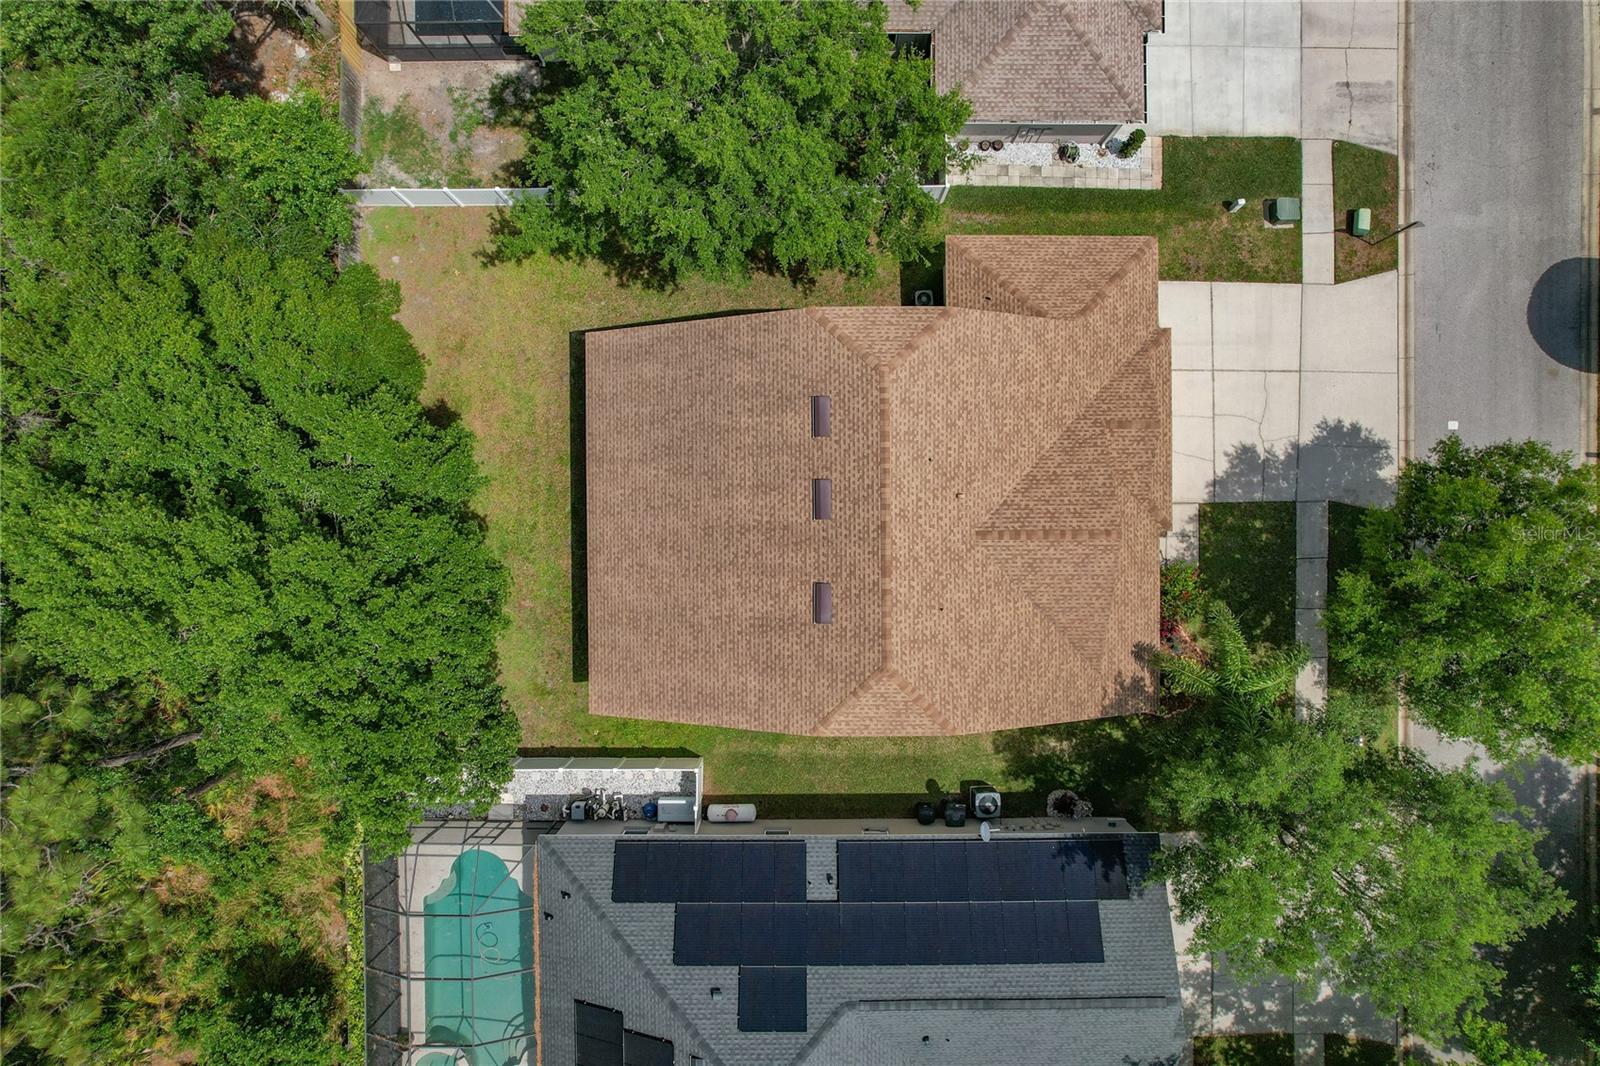 Overhead view of 2020 Roof